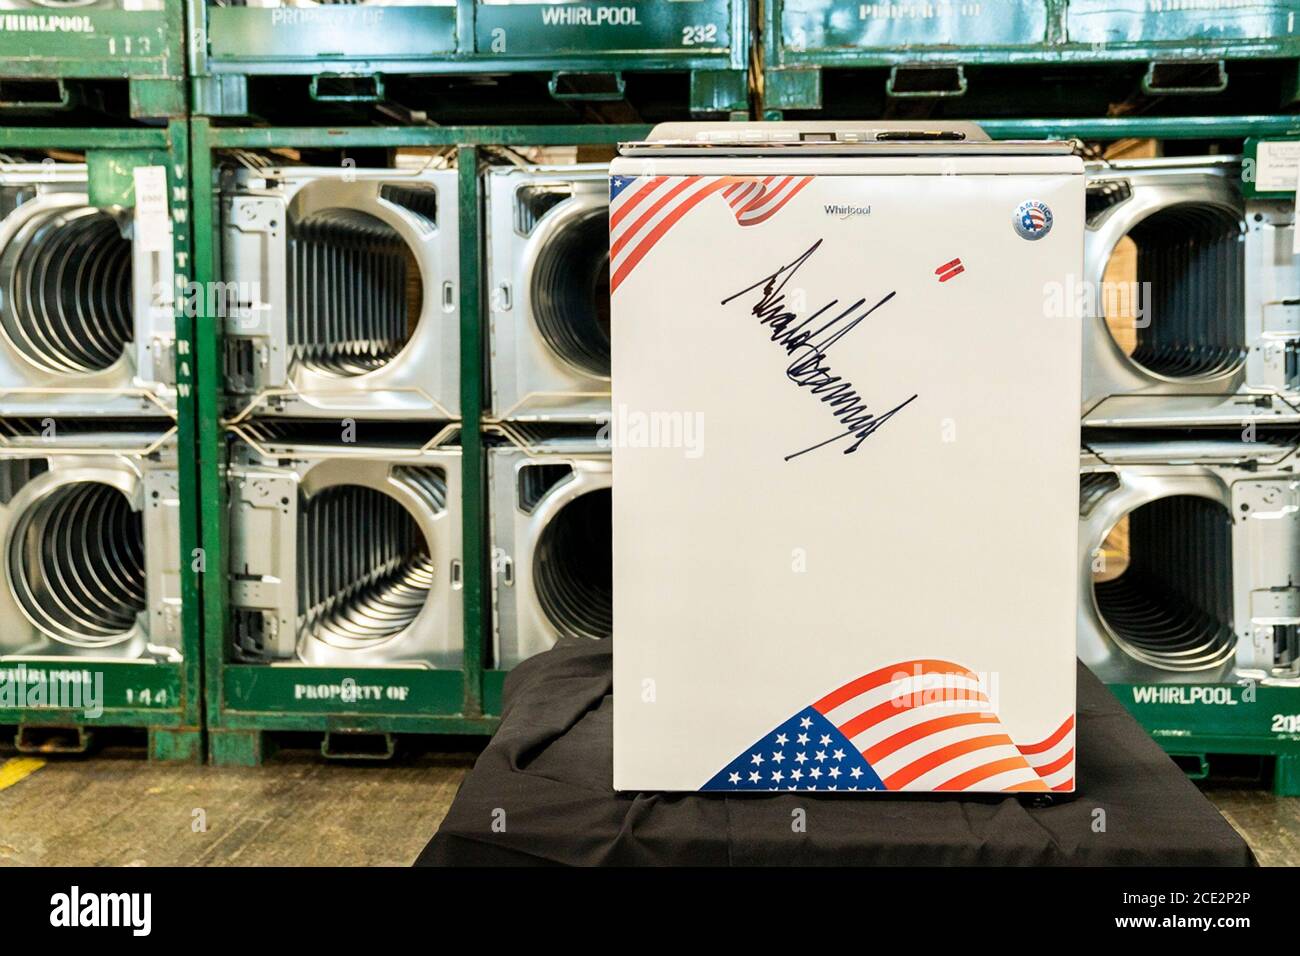 A washing machine signed by U.S. President Donald Trump, during his tour of a Whirlpool Corporation Manufacturing Plant August 6, 2020 in Clyde, Ohio. Stock Photo